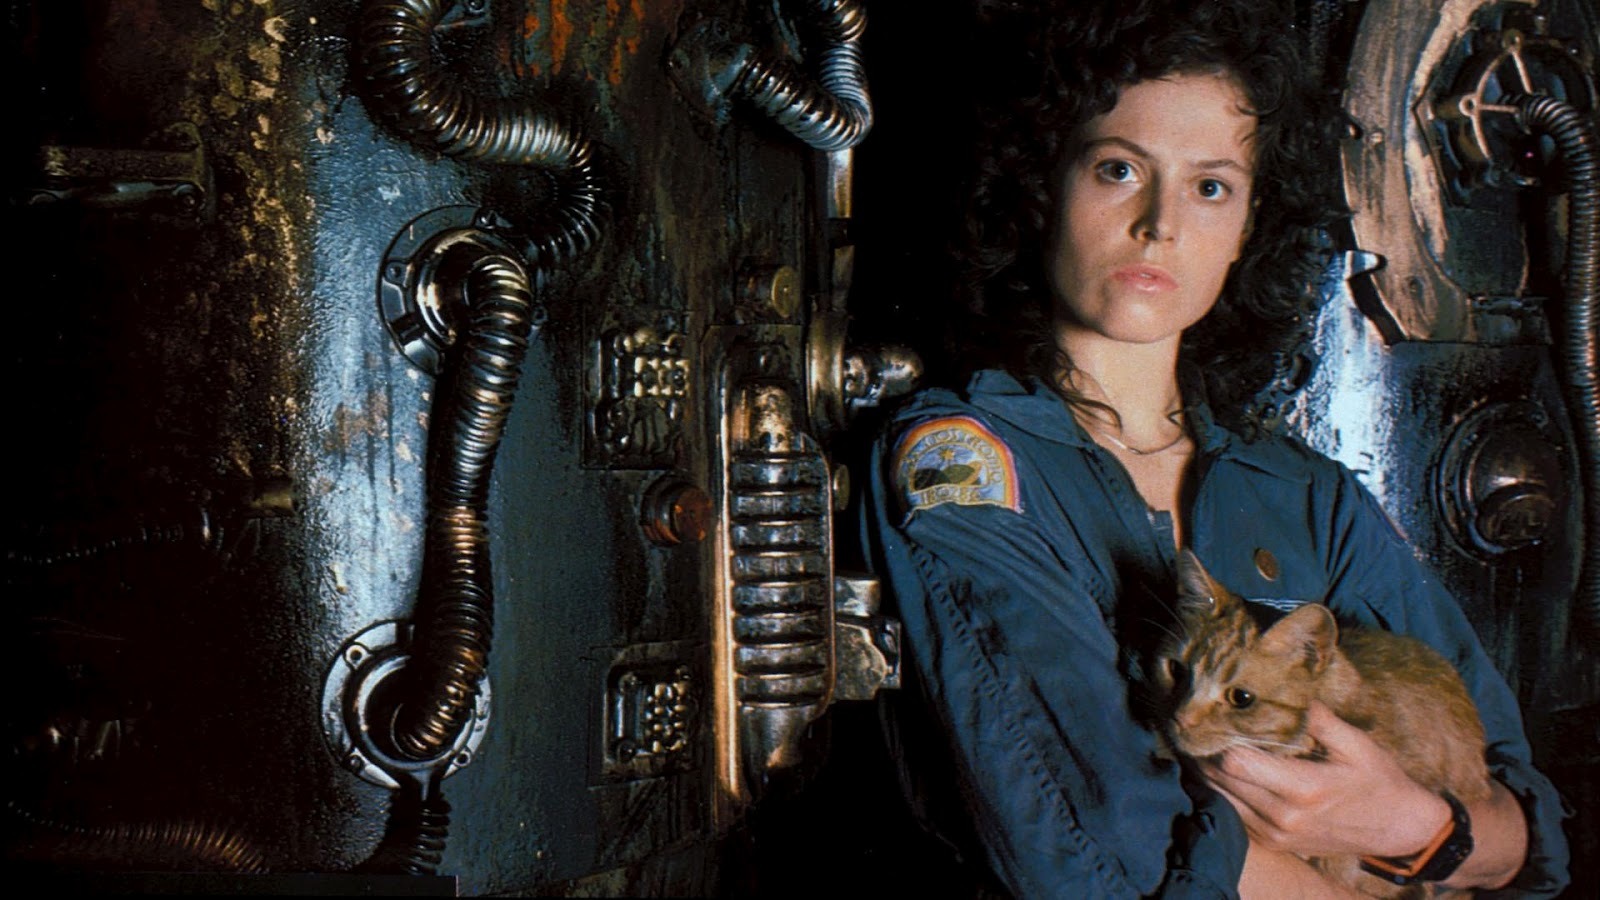 How to Watch Every 'Alien' Movie In Order- Chronological or Release Order